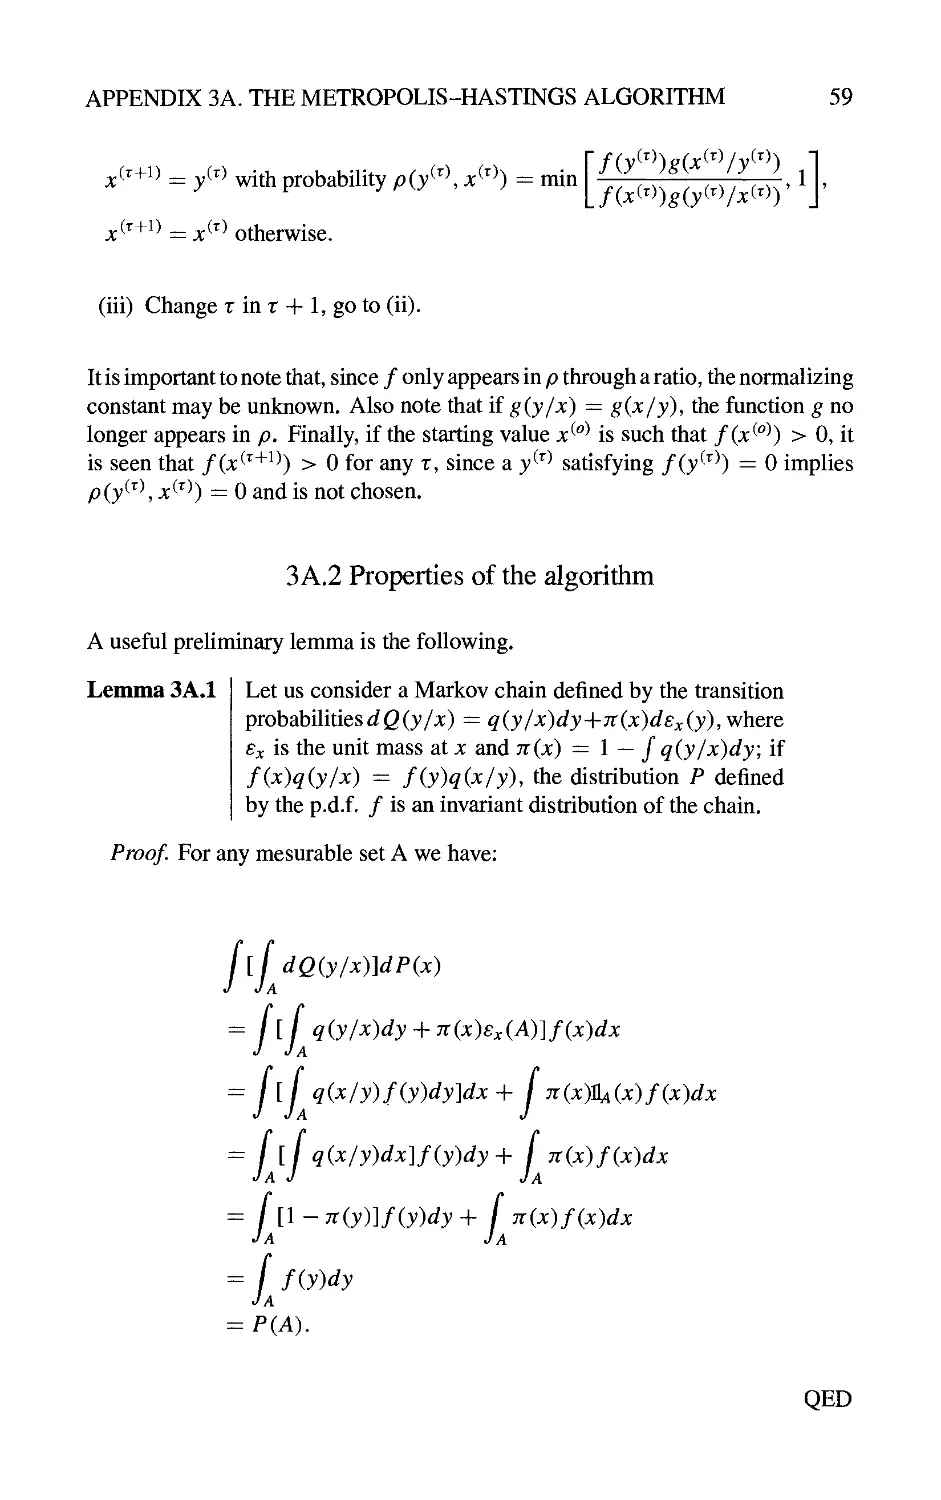 3A.2 Properties of the algorithm